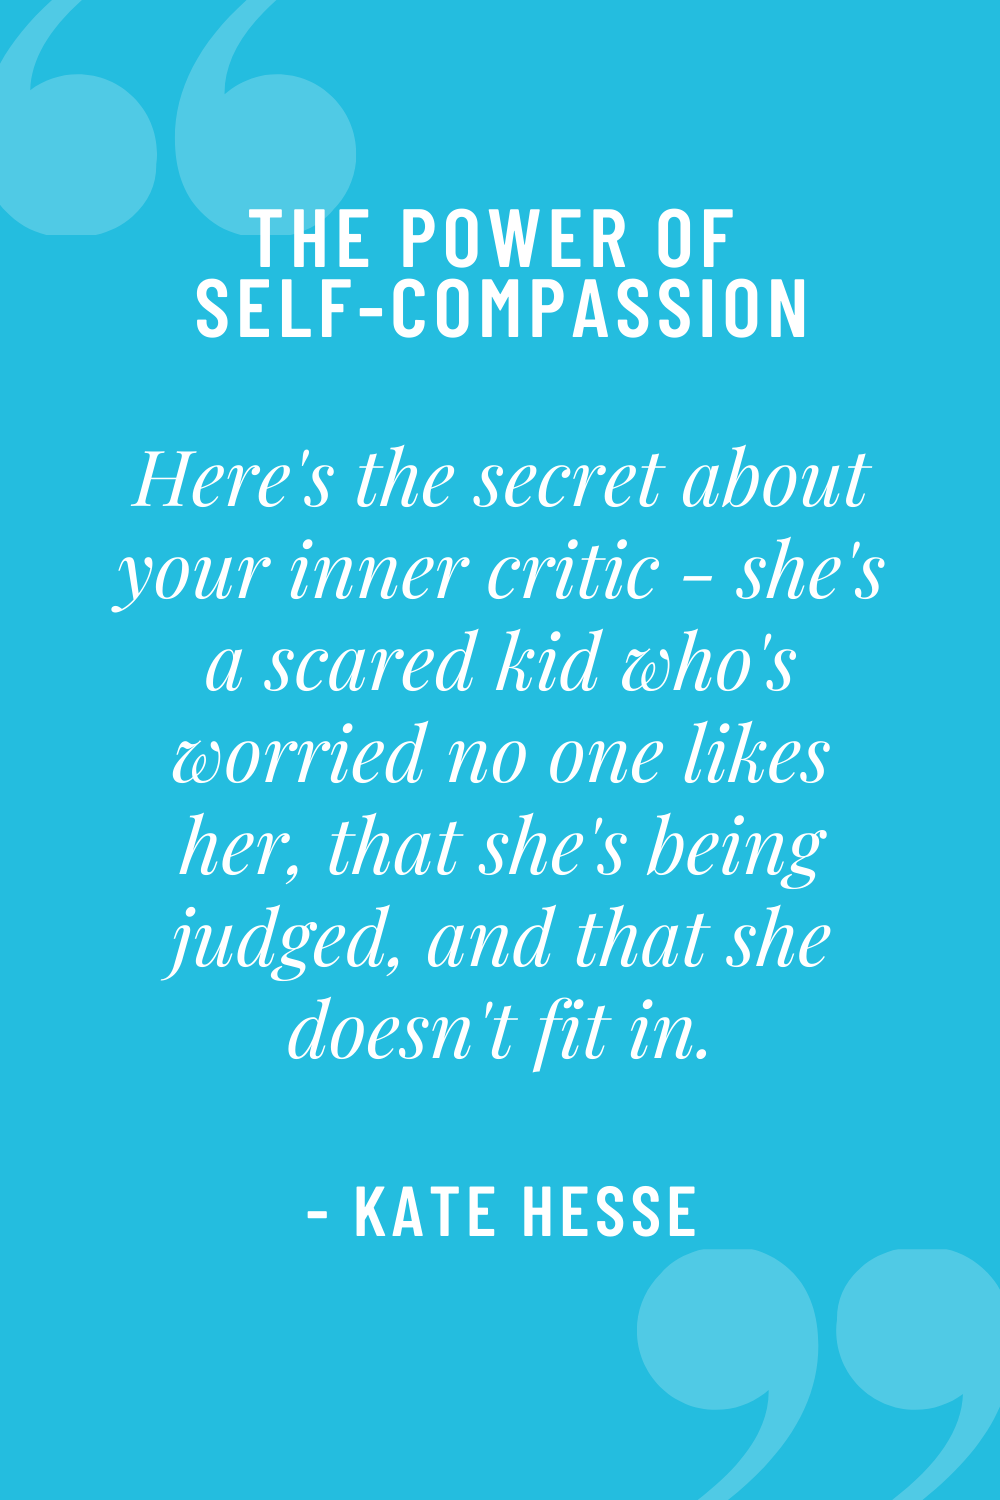 Here's the secret about your inner critic - she's a scared kid who's worried no one likes her, that she's being judged, and that she doesn't fit in.